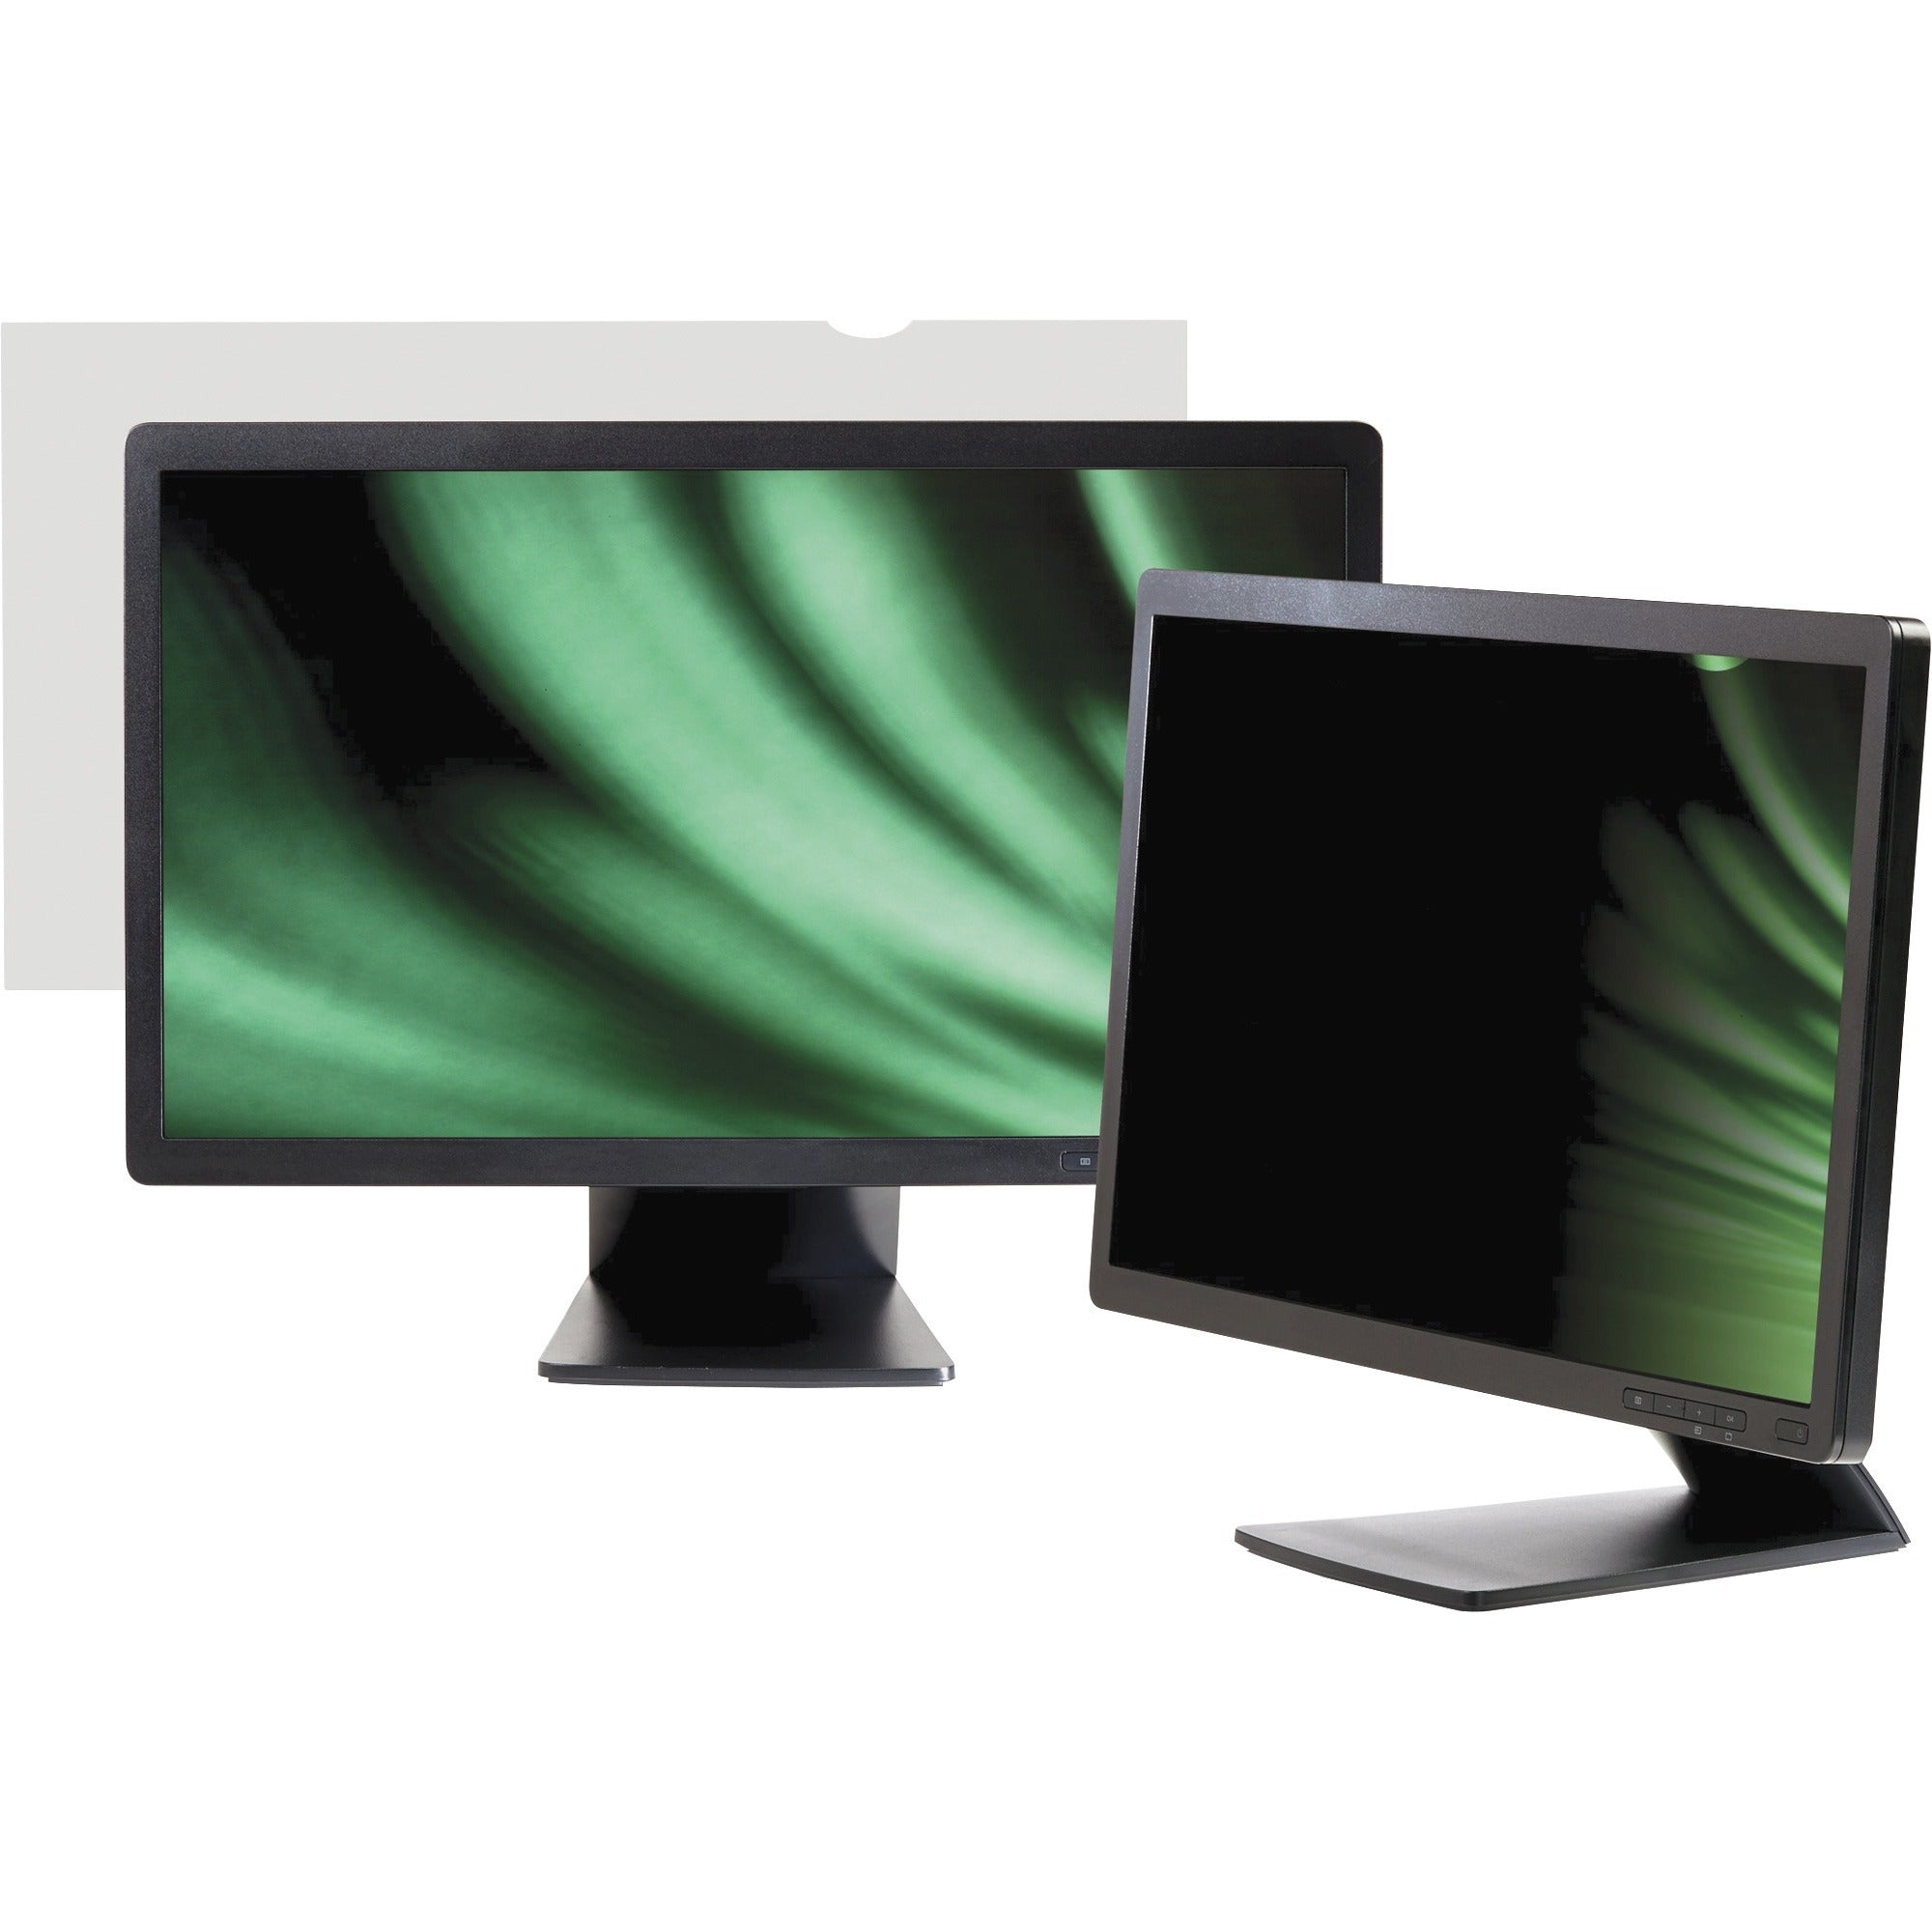 business-source-widescreen-frameless-privacy-filter-black-for-24-widescreen-lcd-monitor-1610-anti-glare-1-pack_bsn20668 - 1